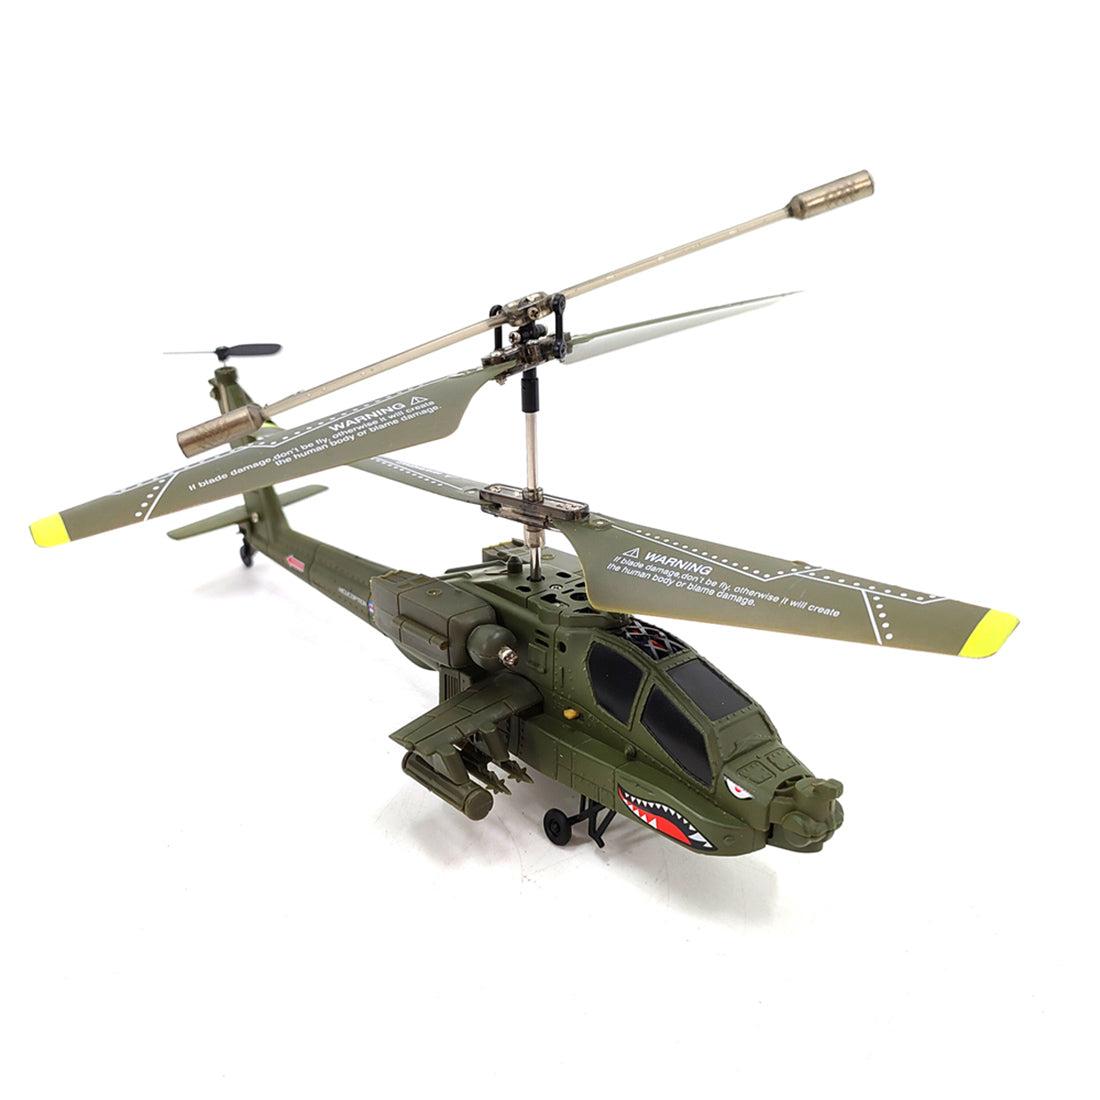 Rc Apache Helicopter For Sale: Top RC Apache Helicopter Models and Where to Buy Them